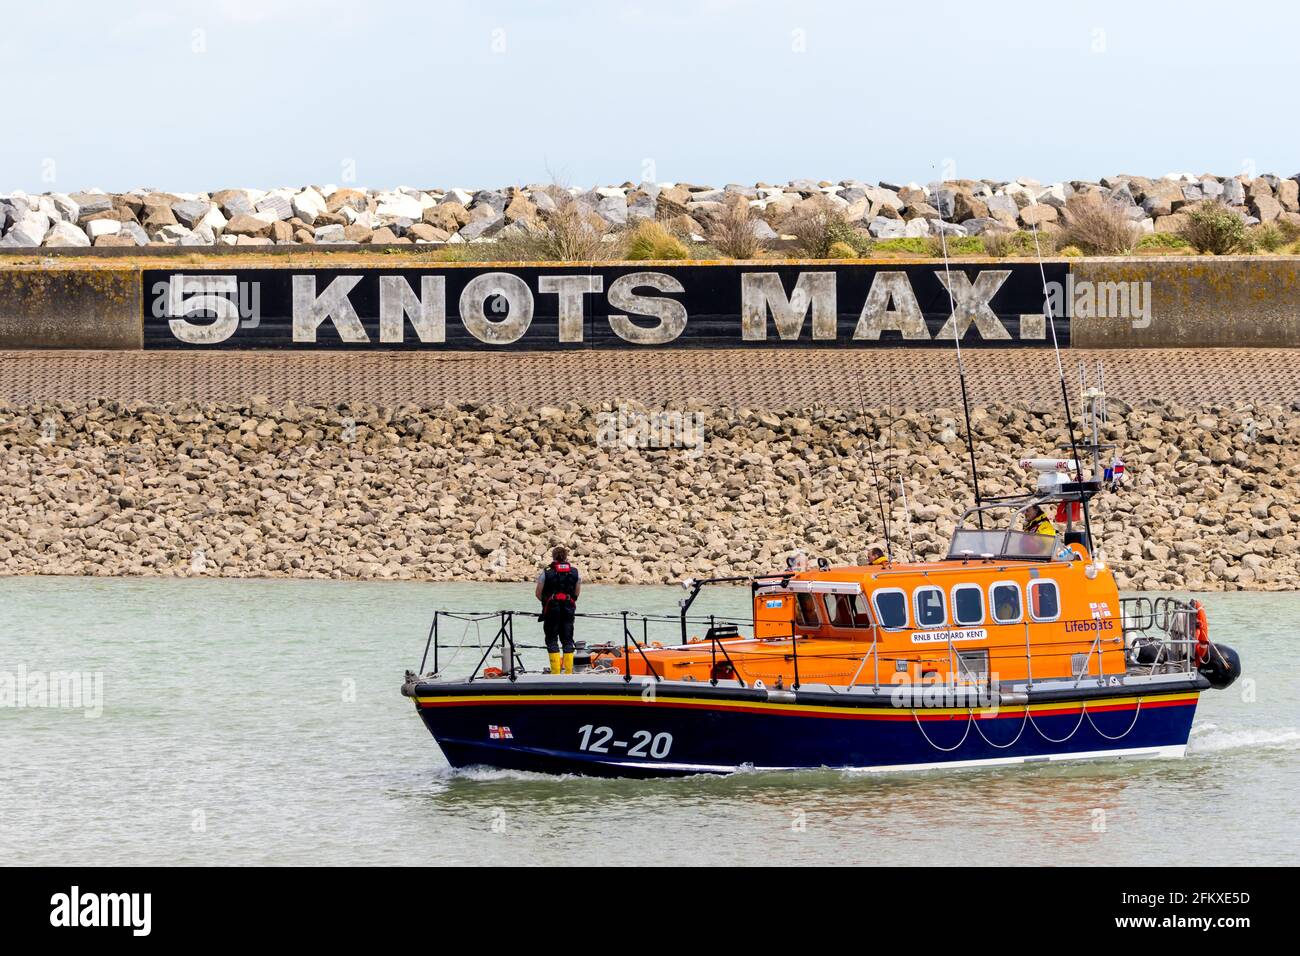 Sovereign Harbour East Sussex, UK. 4th May, 2021. After nearly 30 years of service to Margate the RNLI Mersey class all-weather lifeboat ‘Leonard Kent' has been retired. This afternoon the vessel and her crew stopped at Eastbourne's Sovereign Harbour en route to her final decommissioning. Since being named in 1992 by HRH Princess Alexandra the Leonard Kent has launched over 400 times saving 21 lives and offering aid to 599 others. Credit: Newspics UK South/Alamy Live News Stock Photo